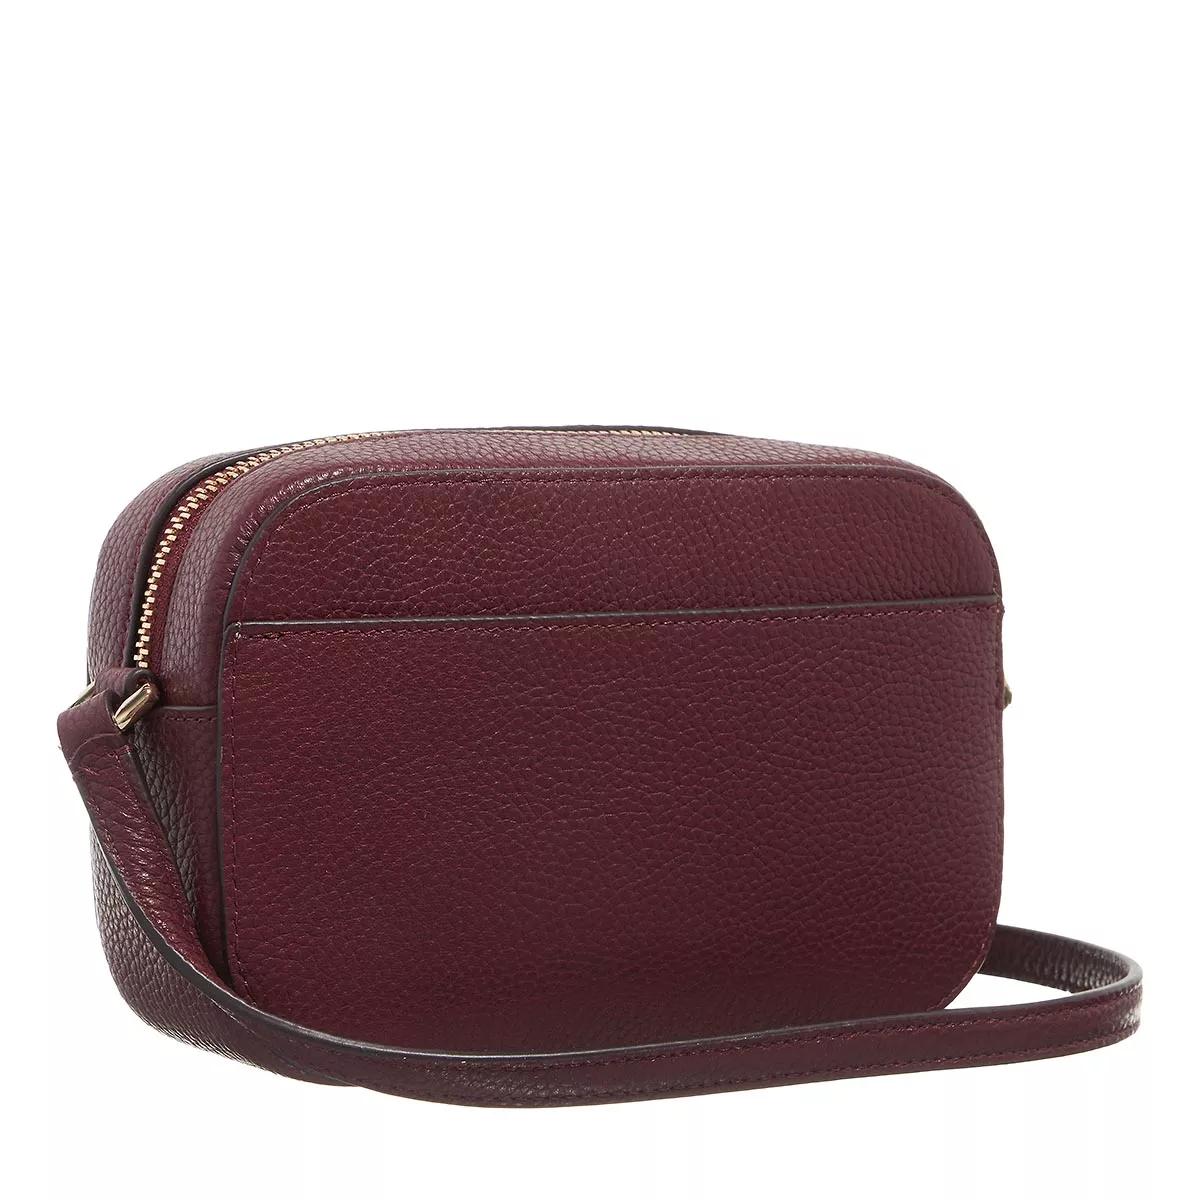 Kate spade new york Crossbody bags Ava Pebbled Leather Crossbody in rood